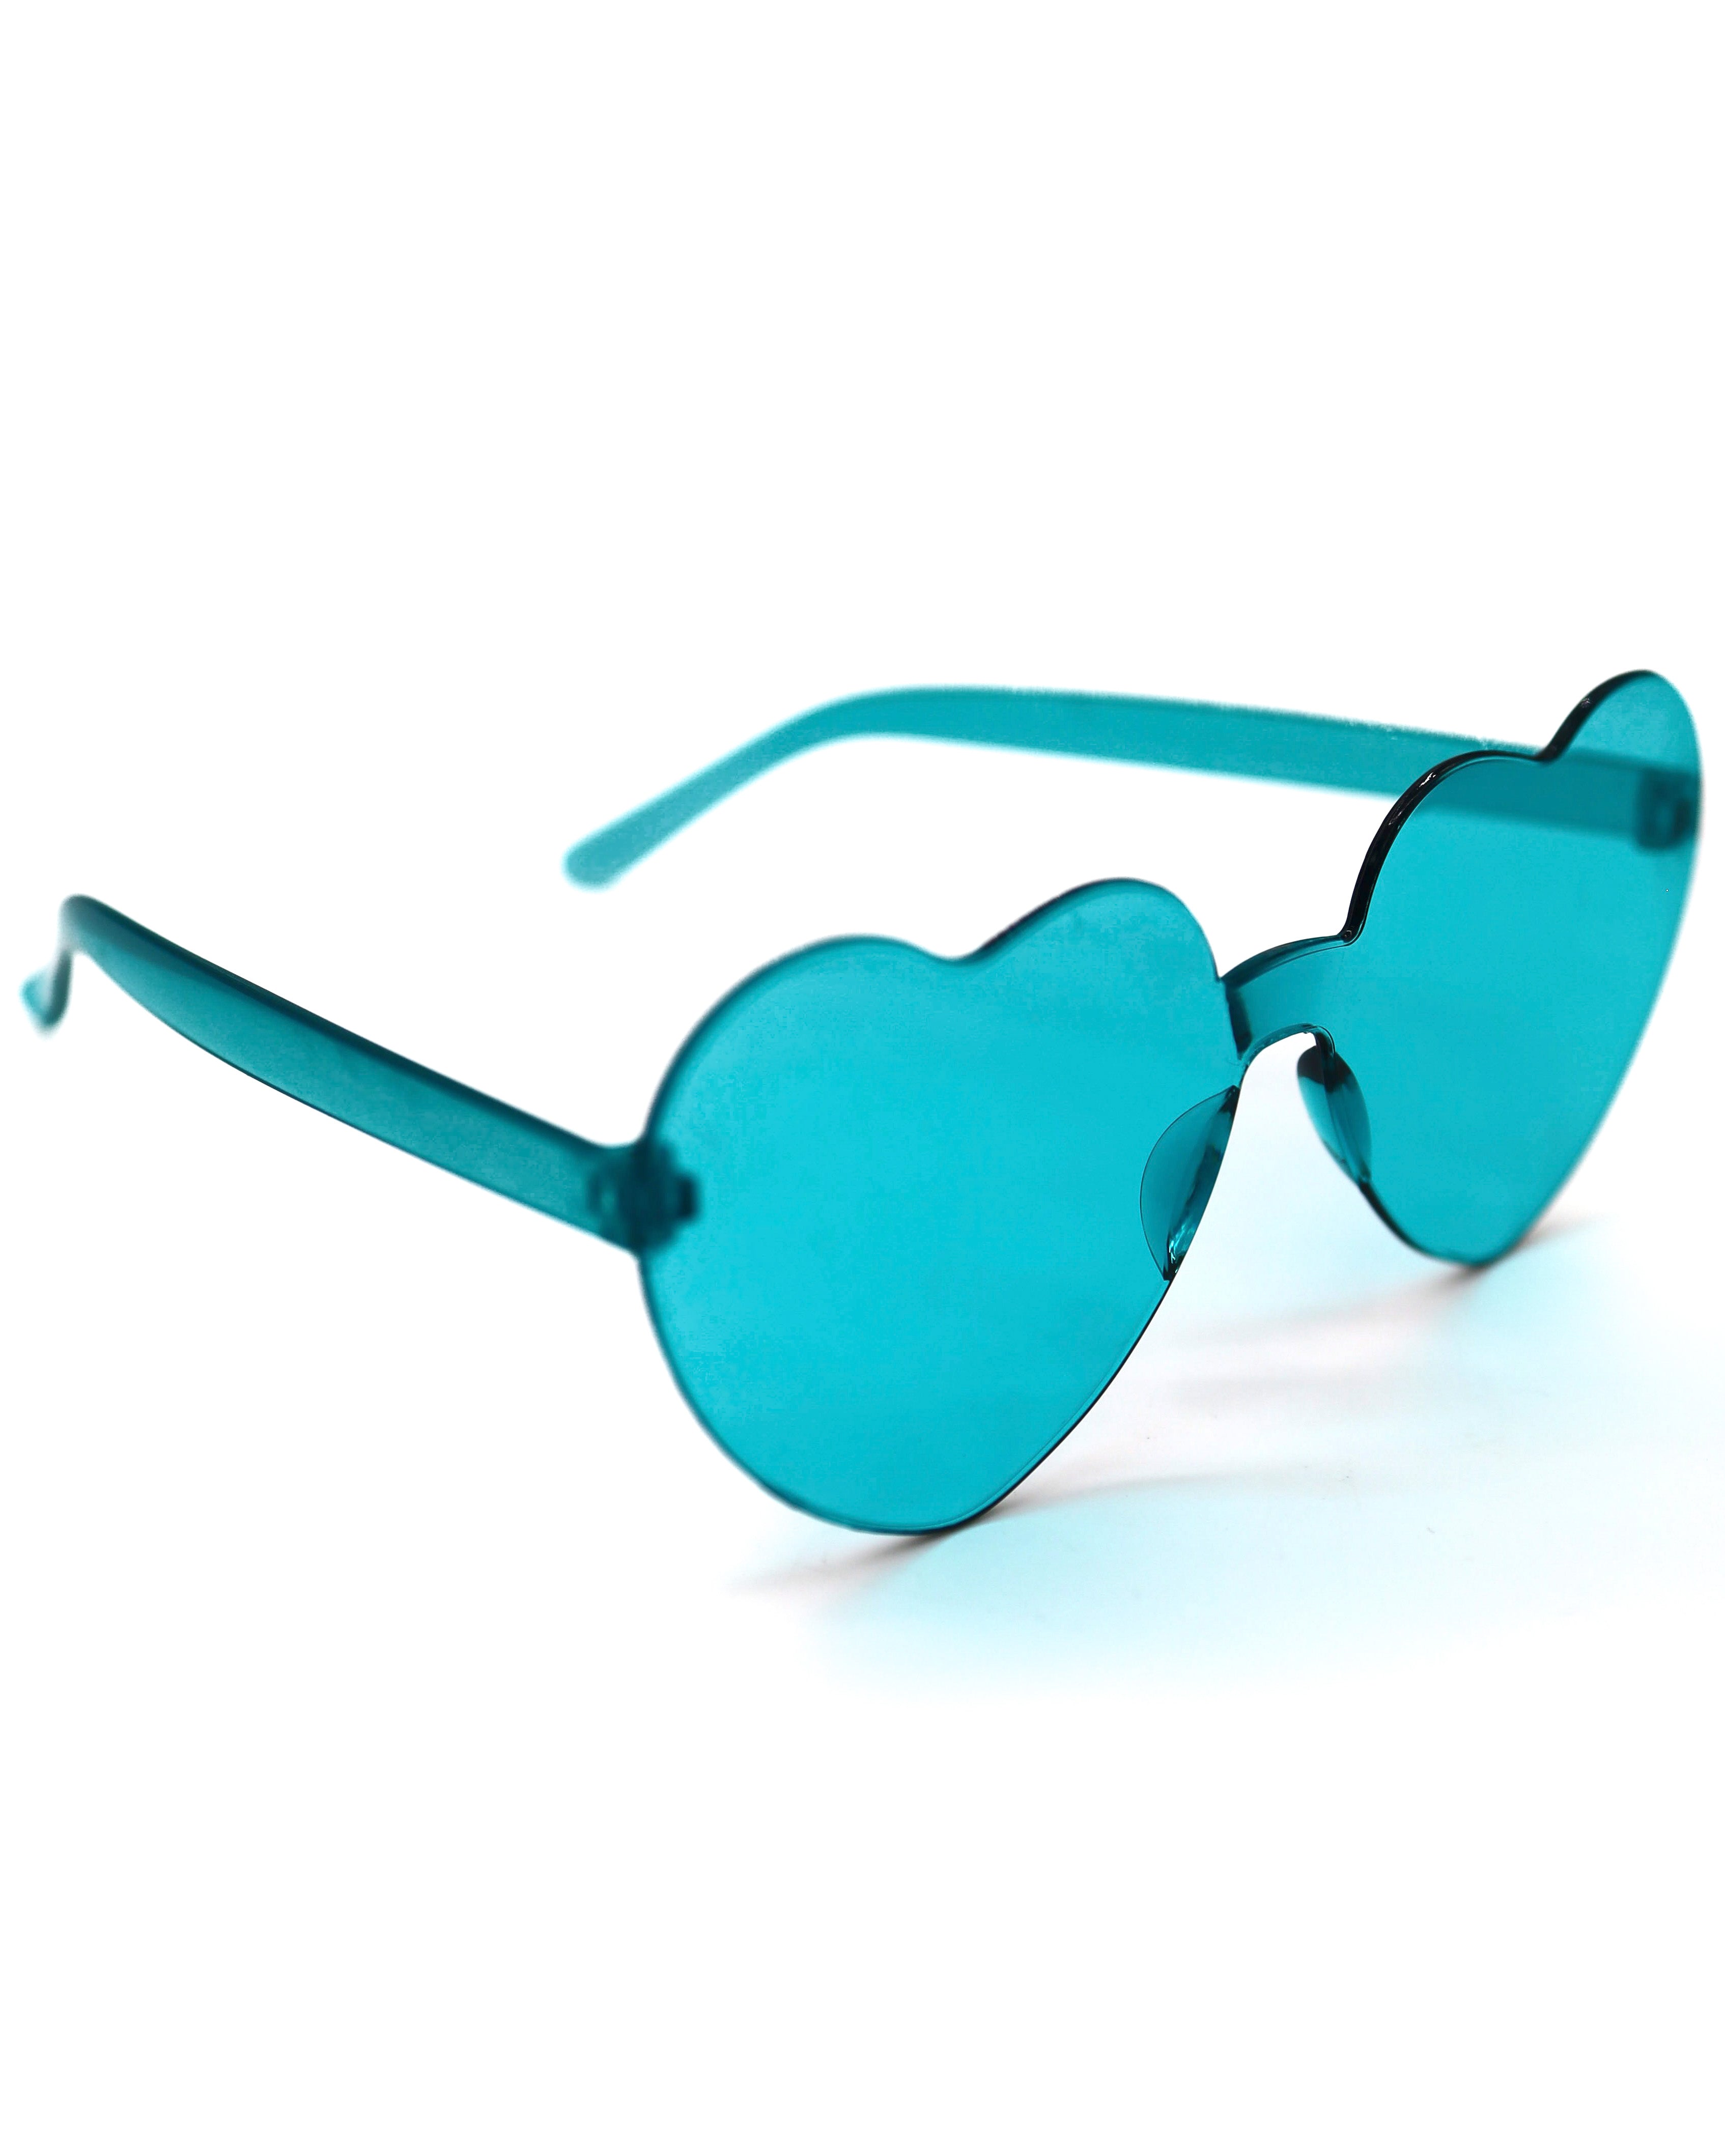 Teal Heart Sunglasses, Heart Sunglasses, - One Stop Rave